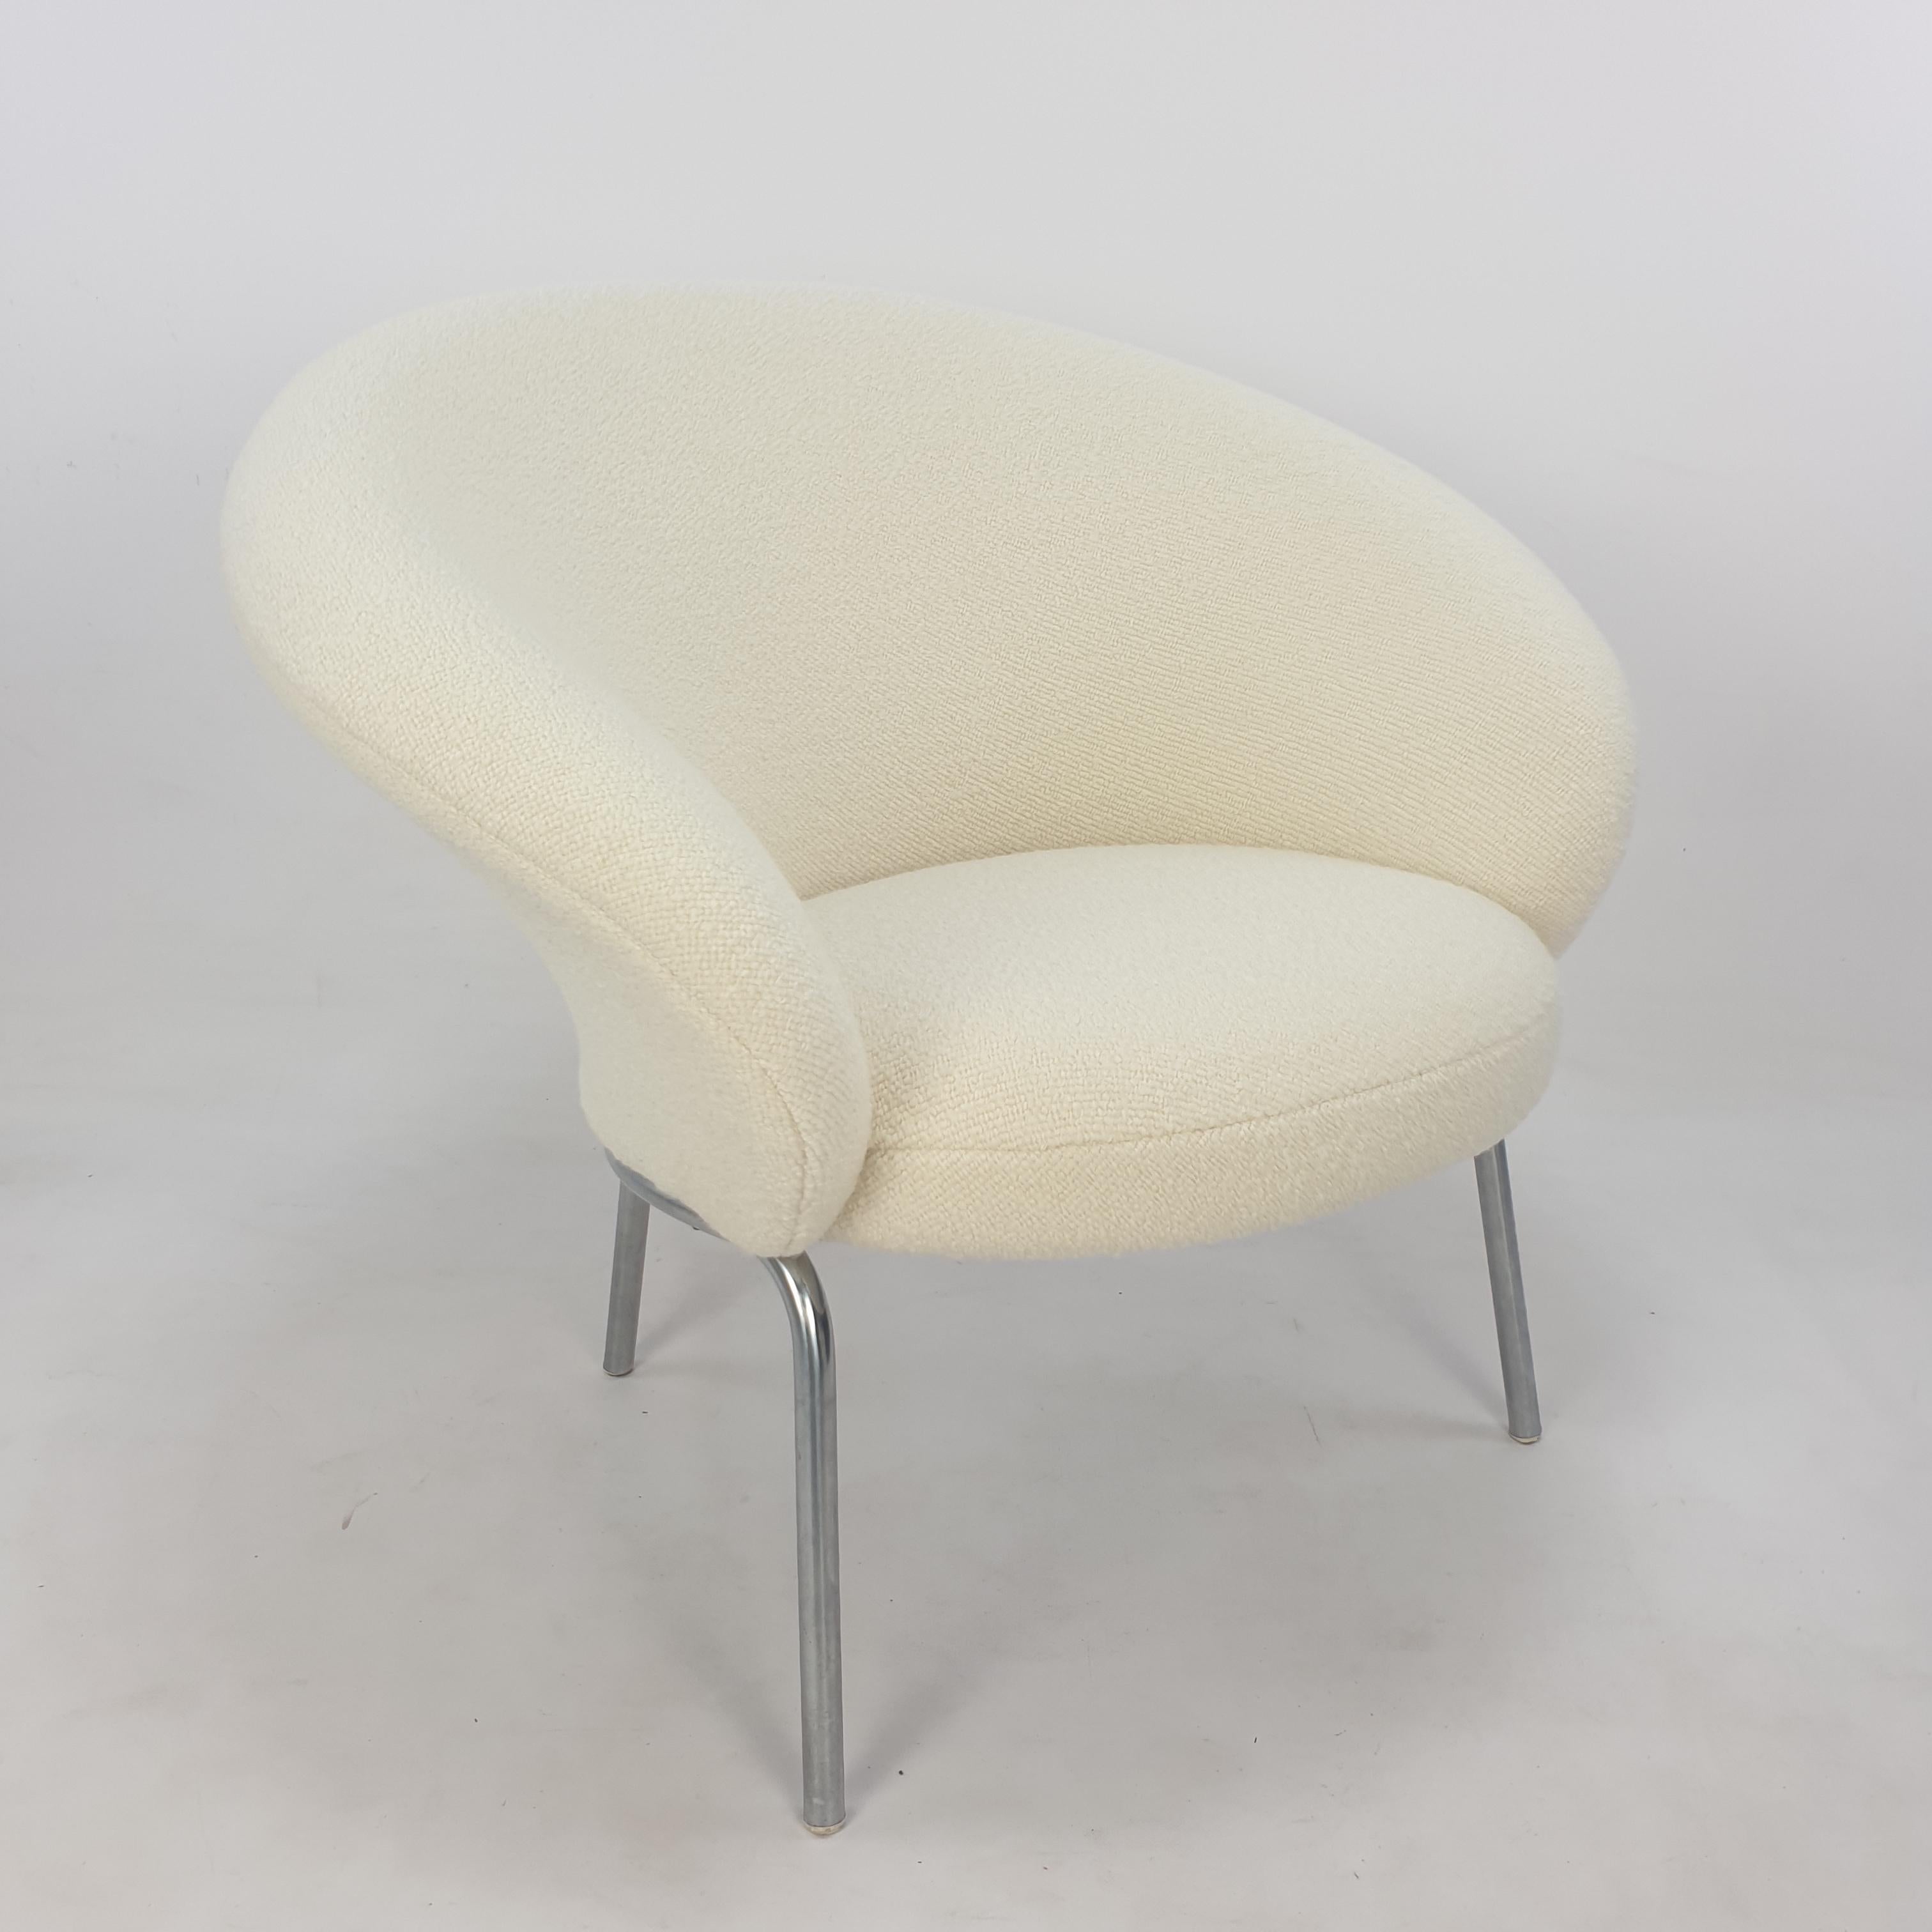 Very rare lounge chair, model F570.
Designed by Pierre Paulin in 1963 and manufactured by Artifort.

This beautiful model was produced for just a very short time, 1 year, and is documented in several books by Pierre Paulin.
It is a design after